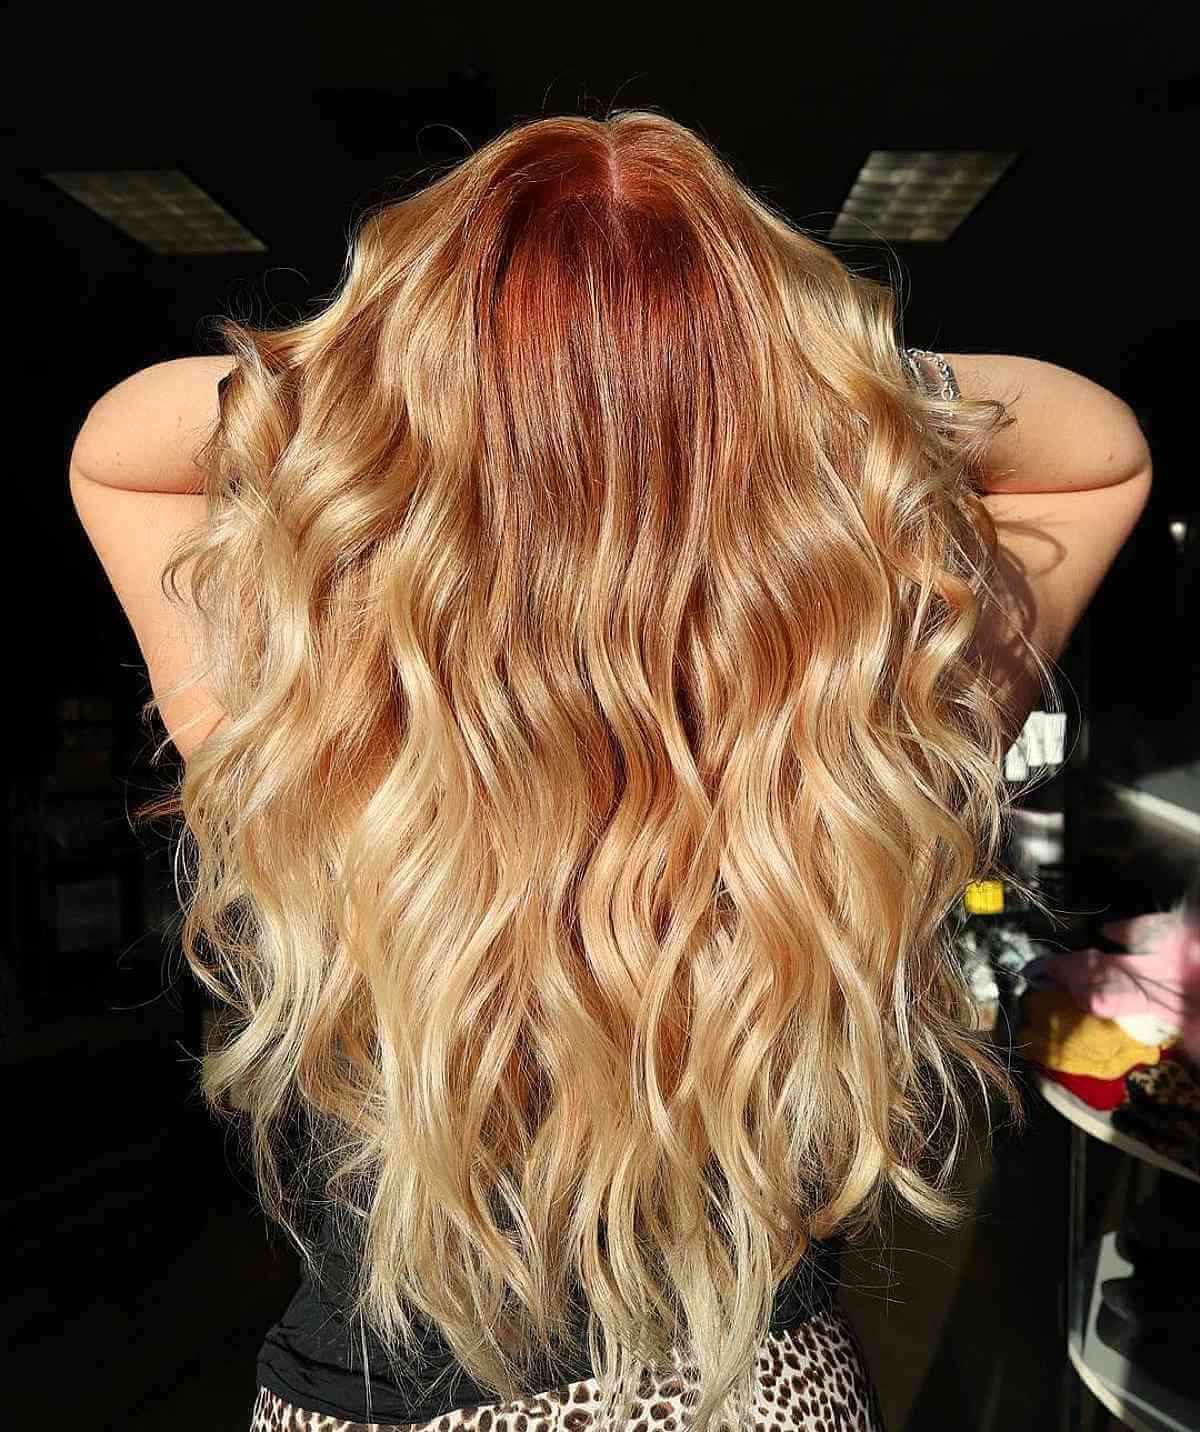 Light Blonde Hair with Strawberry Dark Roots